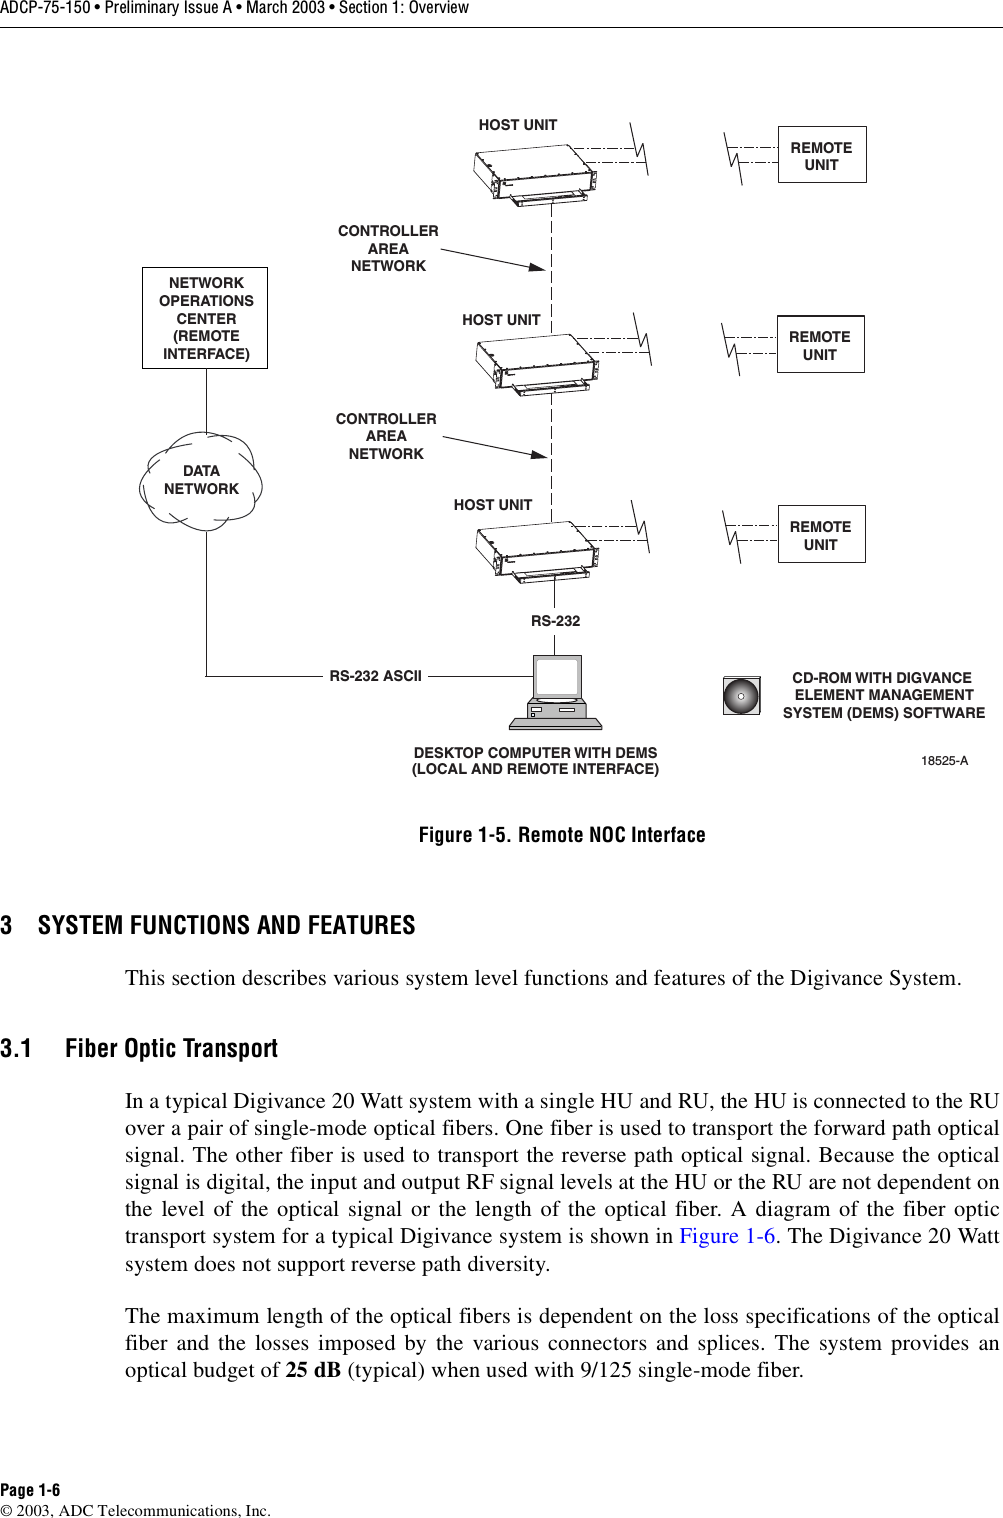 ADCP-75-150 • Preliminary Issue A • March 2003 • Section 1: OverviewPage 1-6©2003, ADC Telecommunications, Inc.Figure 1-5. Remote NOC Interface3 SYSTEM FUNCTIONS AND FEATURESThis section describes various system level functions and features of the Digivance System.3.1 Fiber Optic TransportIn atypical Digivance 20 Watt system with asingle HU and RU, the HU is connected to the RUover apair of single-mode optical fibers. One fiber is used to transport the forward path opticalsignal. The other fiber is used to transport the reverse path optical signal. Because the opticalsignal is digital, the input and output RF signal levels at the HU or the RU are not dependent onthe level of the optical signal or the length of the optical fiber. Adiagram of the fiber optictransport system for atypical Digivance system is shown in Figure 1-6.The Digivance 20 Wattsystem does not support reverse path diversity.The maximum length of the optical fibers is dependent on the loss specifications of the opticalfiber and the losses imposed by the various connectors and splices. The system provides anoptical budget of 25 dB (typical) when used with 9/125 single-mode fiber.DESKTOP COMPUTER WITH DEMS(LOCAL AND REMOTE INTERFACE)HOST UNITHOST UNITHOST UNITNETWORKOPERATIONSCENTER(REMOTEINTERFACE)DATANETWORKCONTROLLERAREANETWORKCONTROLLERAREANETWORKRS-232 ASCIIRS-23218525-ACD-ROM WITH DIGVANCE ELEMENT MANAGEMENTSYSTEM (DEMS) SOFTWAREREMOTEUNITREMOTEUNITREMOTEUNIT